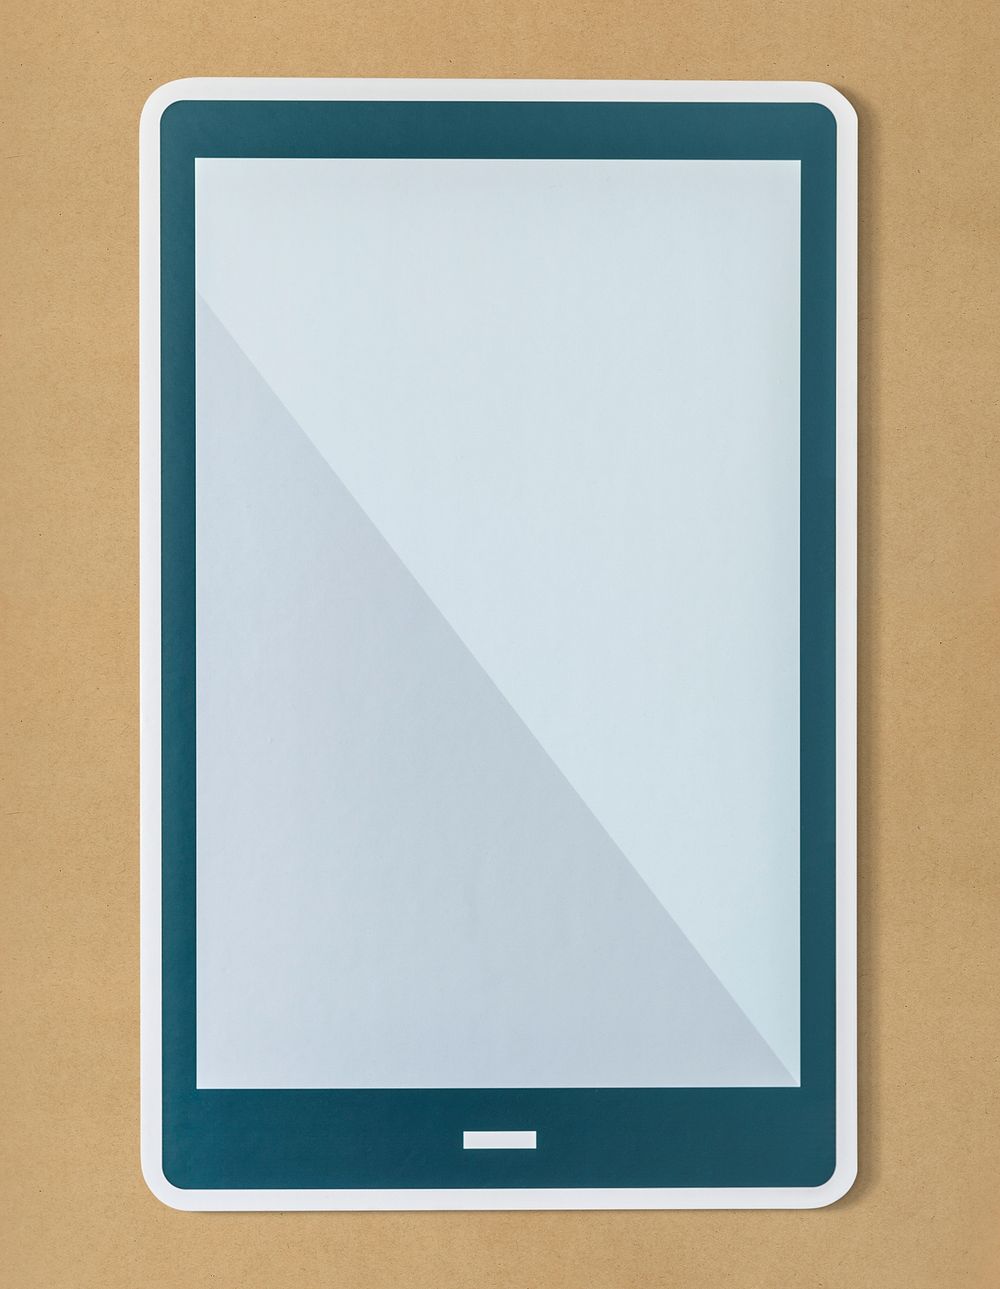 Blank isolated digital tablet icon